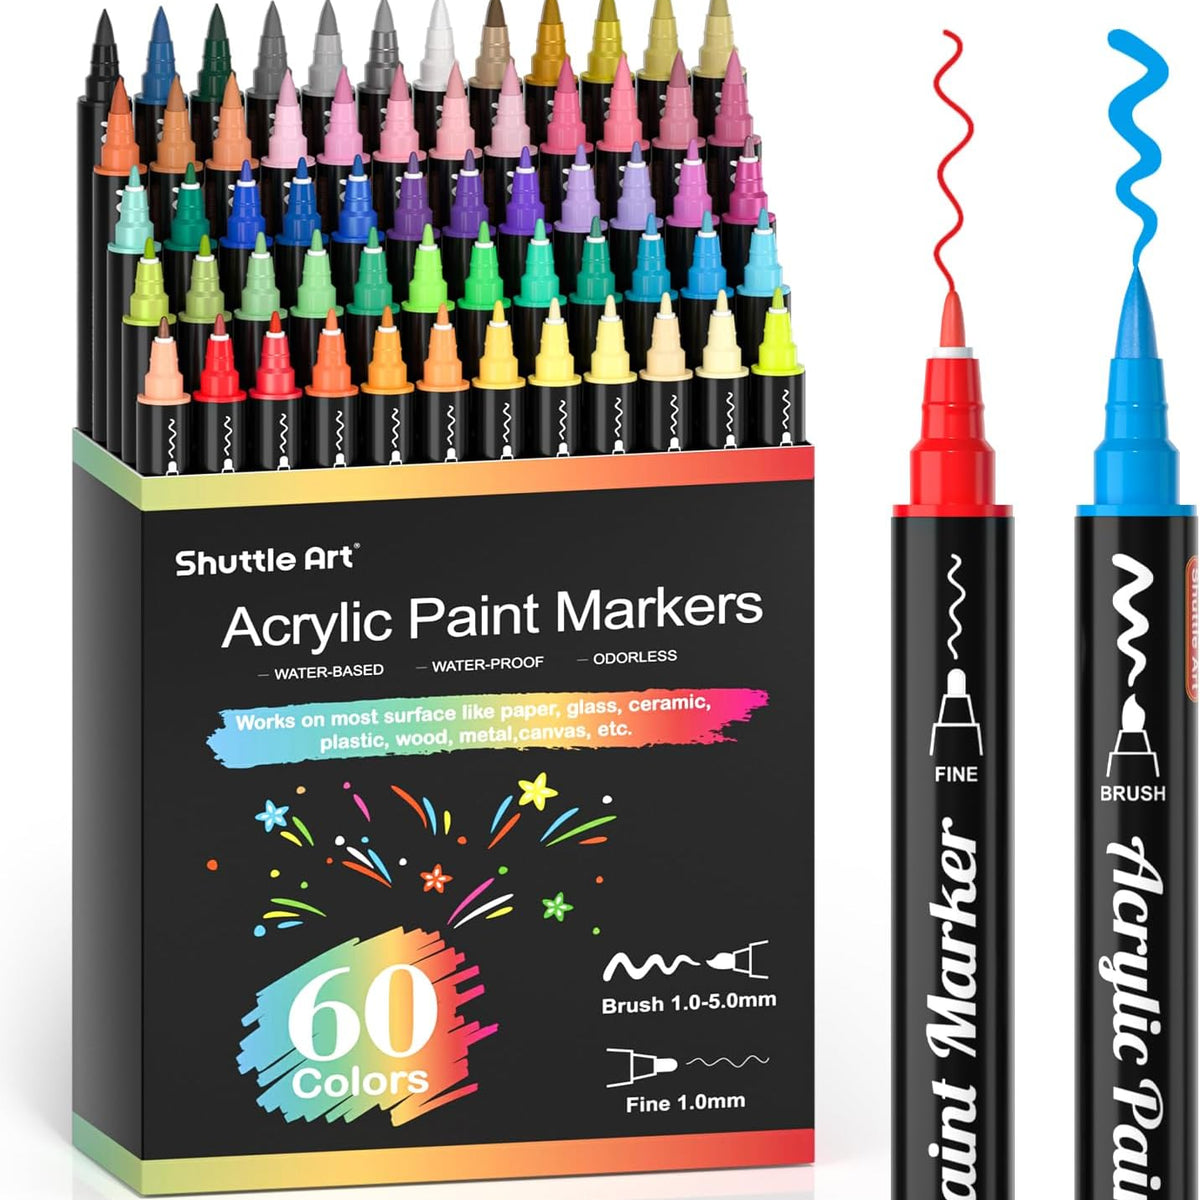 Shuttle Art 48 Colors Dual Tip Acrylic Paint Markers, Brush Tip and Fine  Tip Acrylic Paint Pens for Rock Painting, Ceramic, Wood, Canvas, Plastic